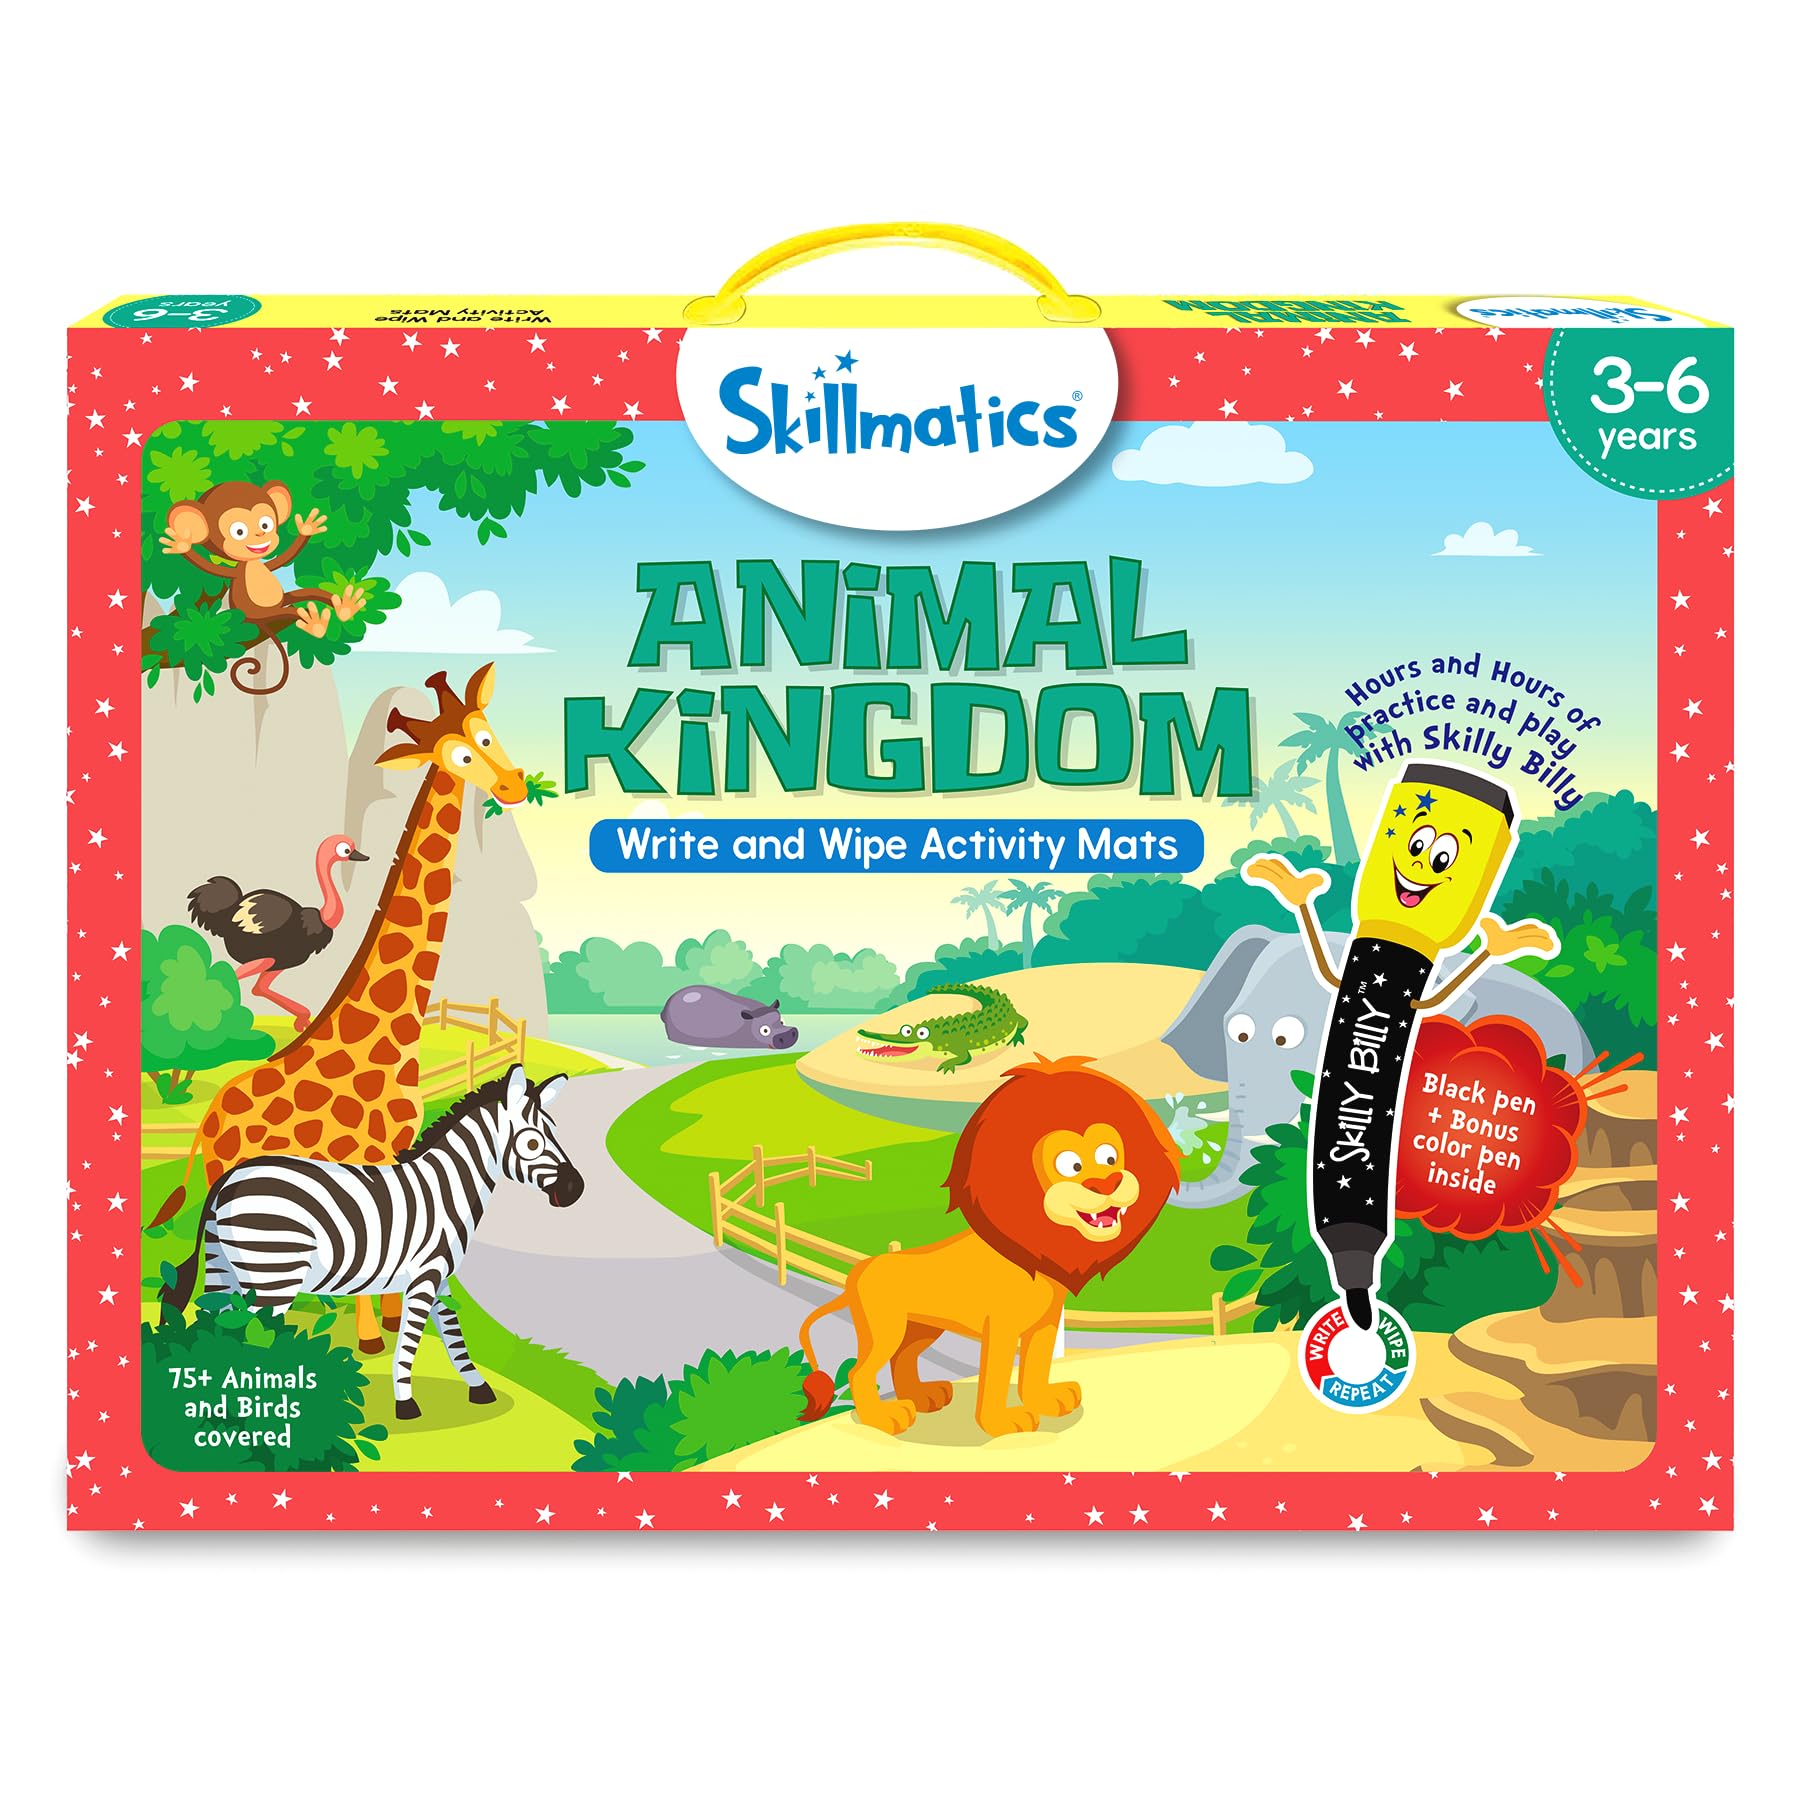 Skillmatics Educational game - Animal Kingdom, Reusable Activity Mats with 2 Dry Erase Markers, gifts for Ages 3 to 6